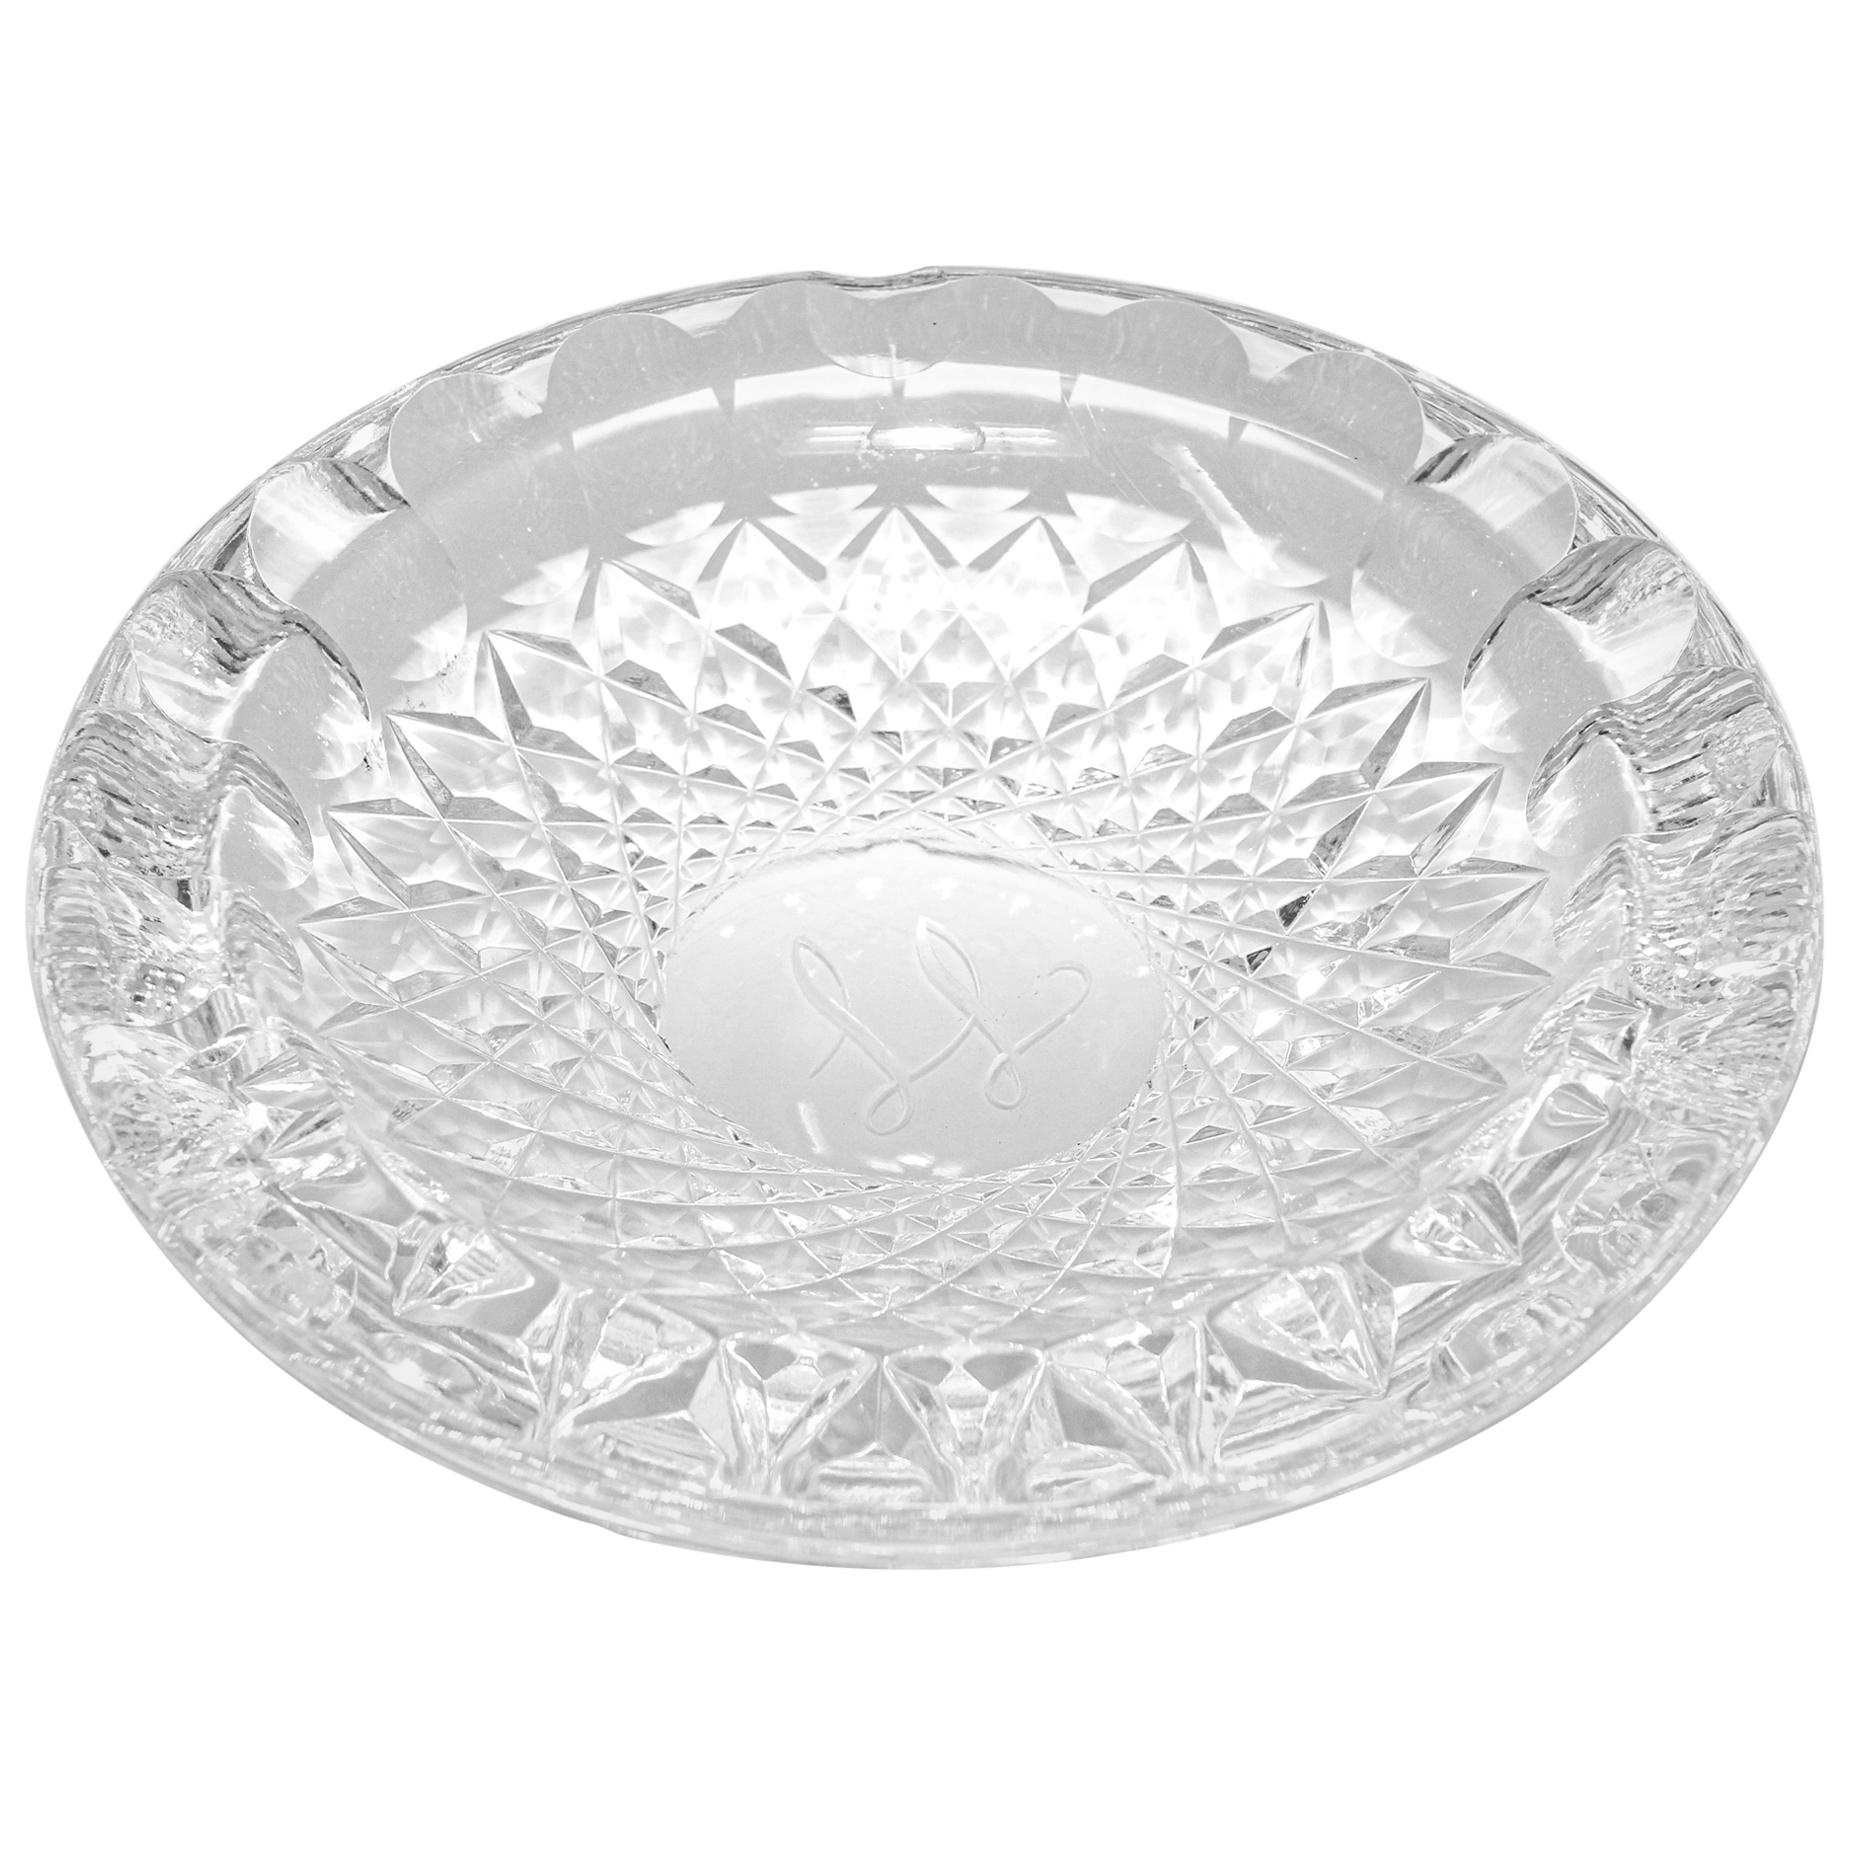 Vintage Cut Crystal Clear Glass Ashtray Monogrammed